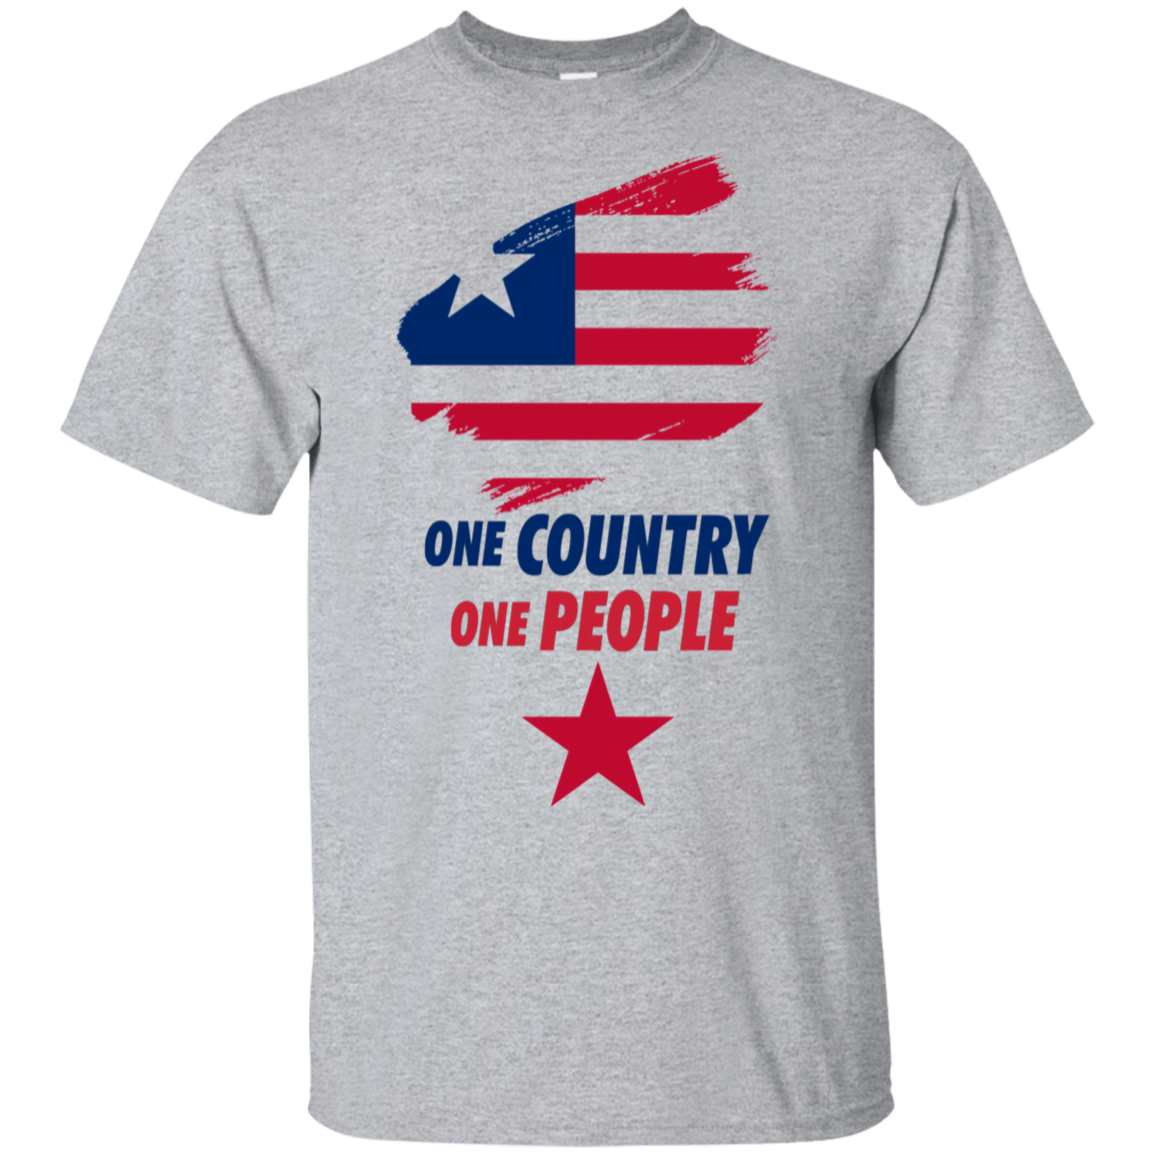 One Country, One People T-Shirt